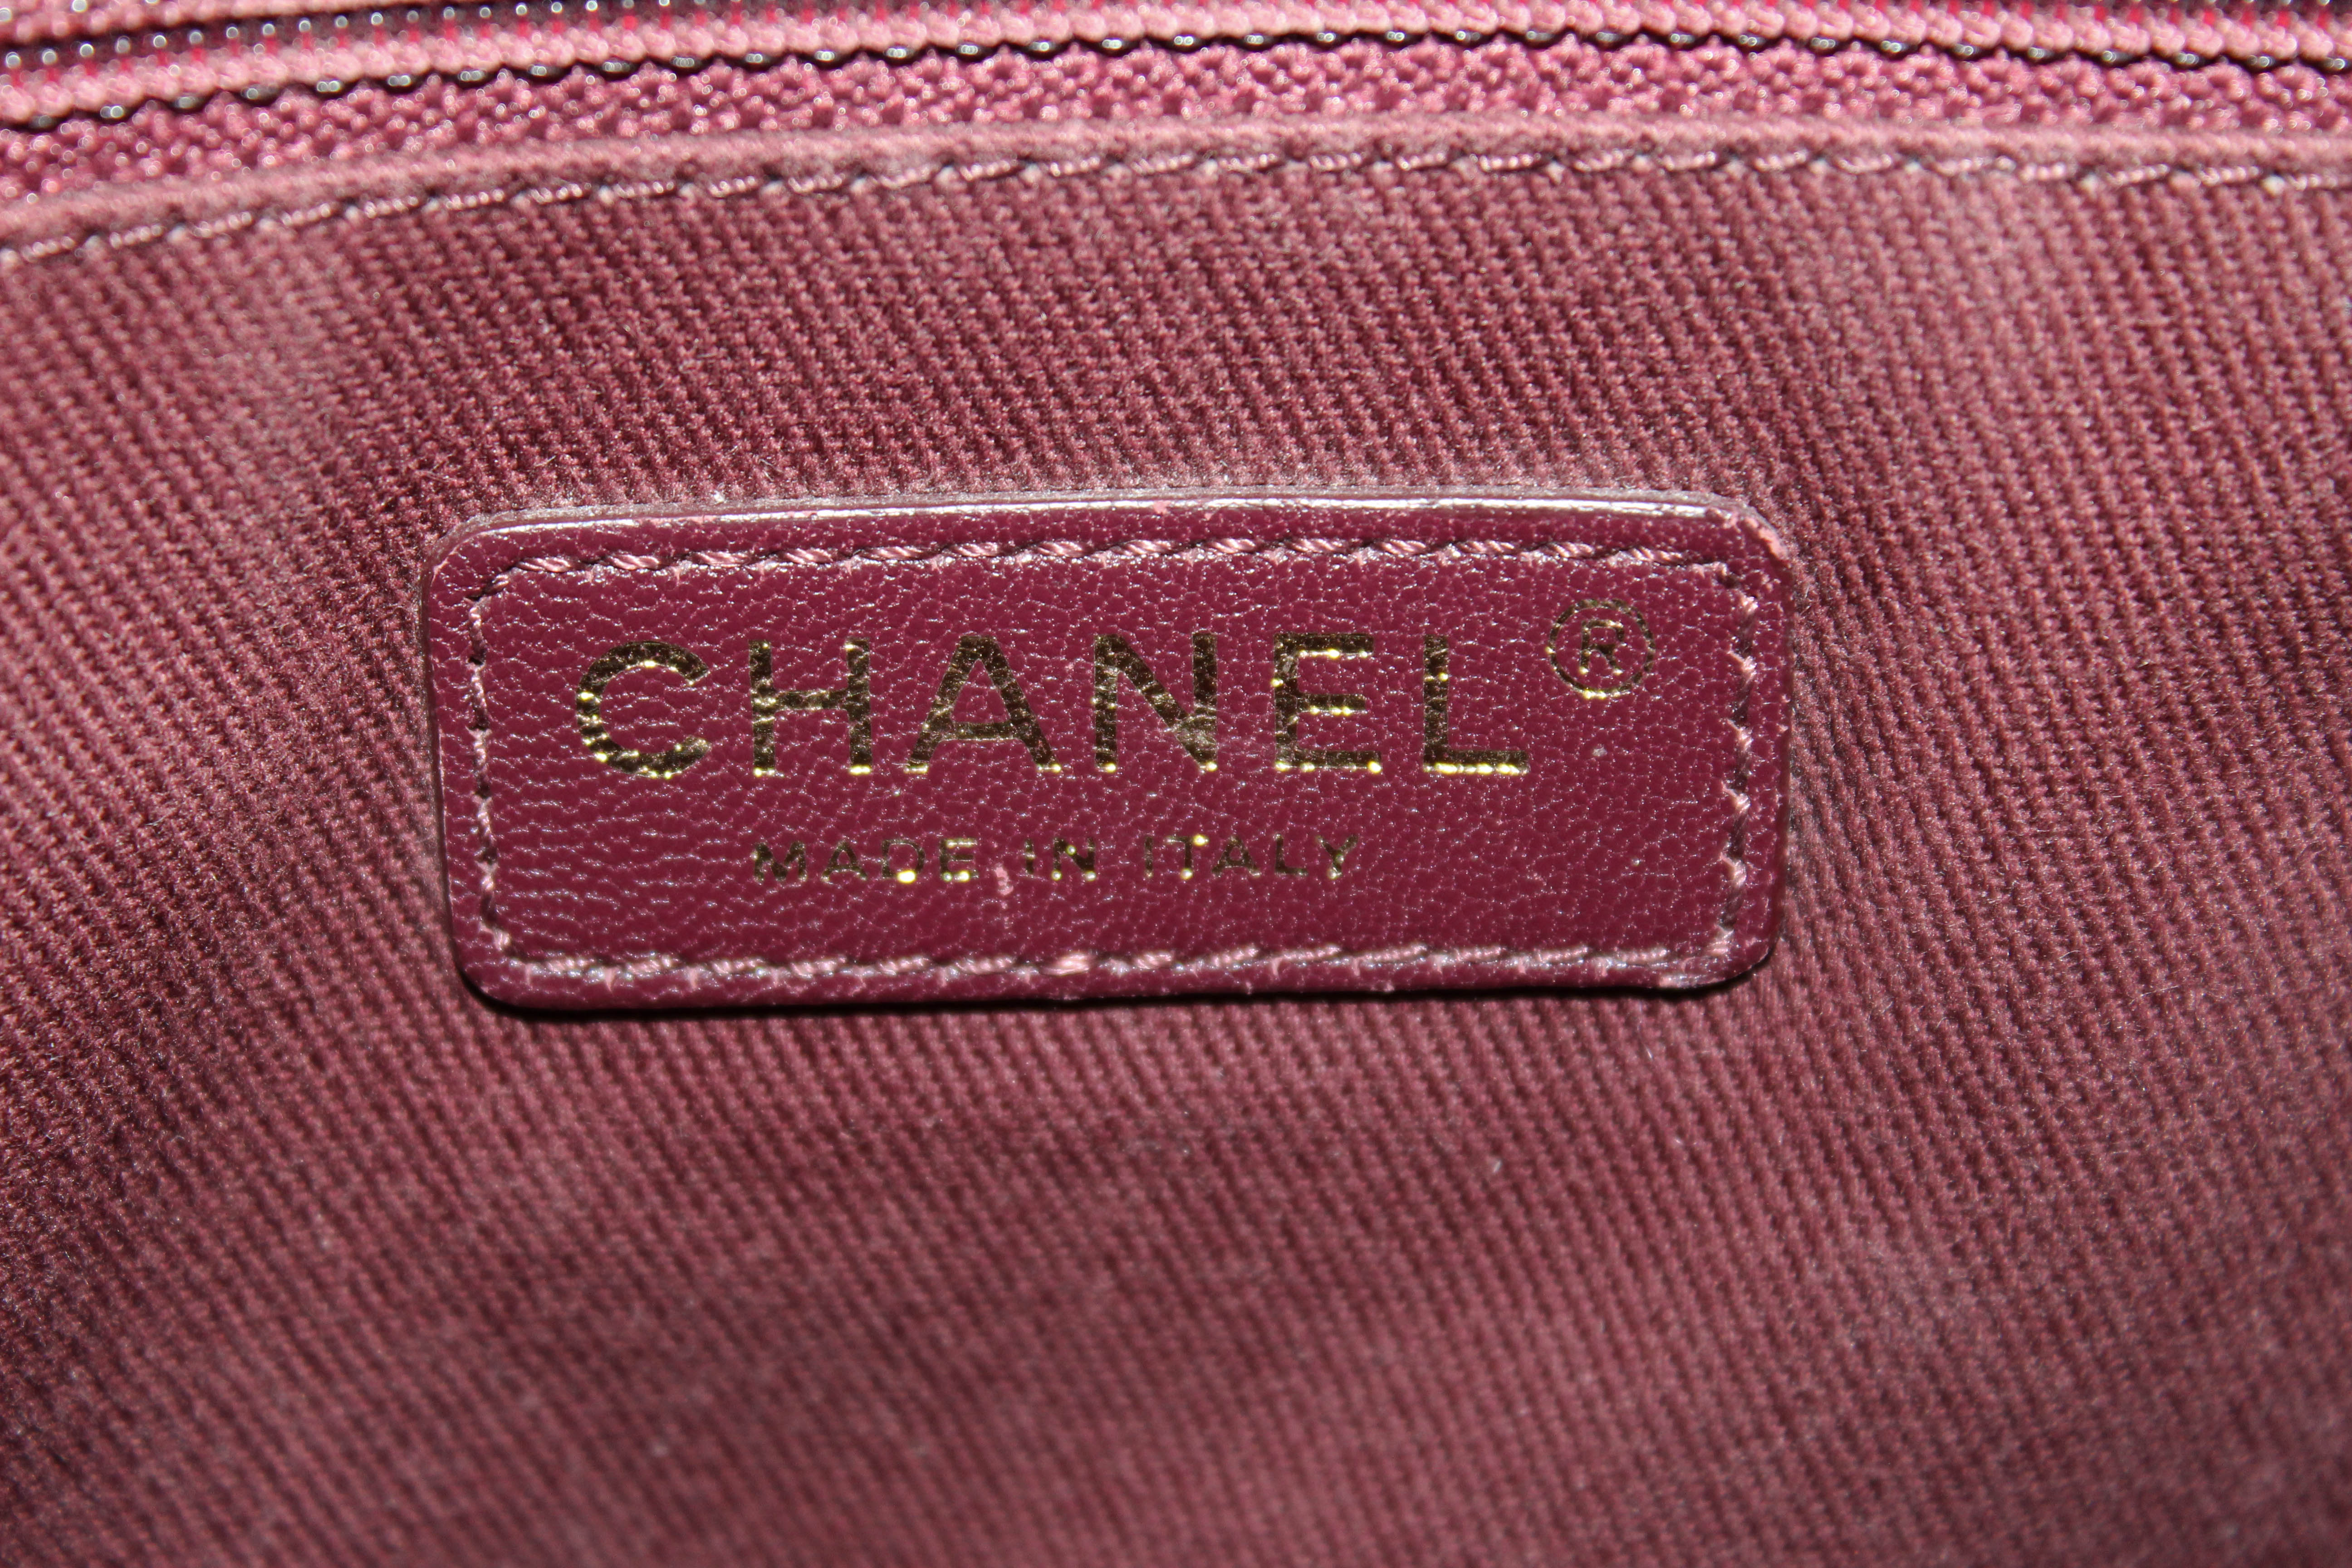 Authentic Chanel 31 Rue Cambon Paris Burgundy Distressed Leather Tote Bag